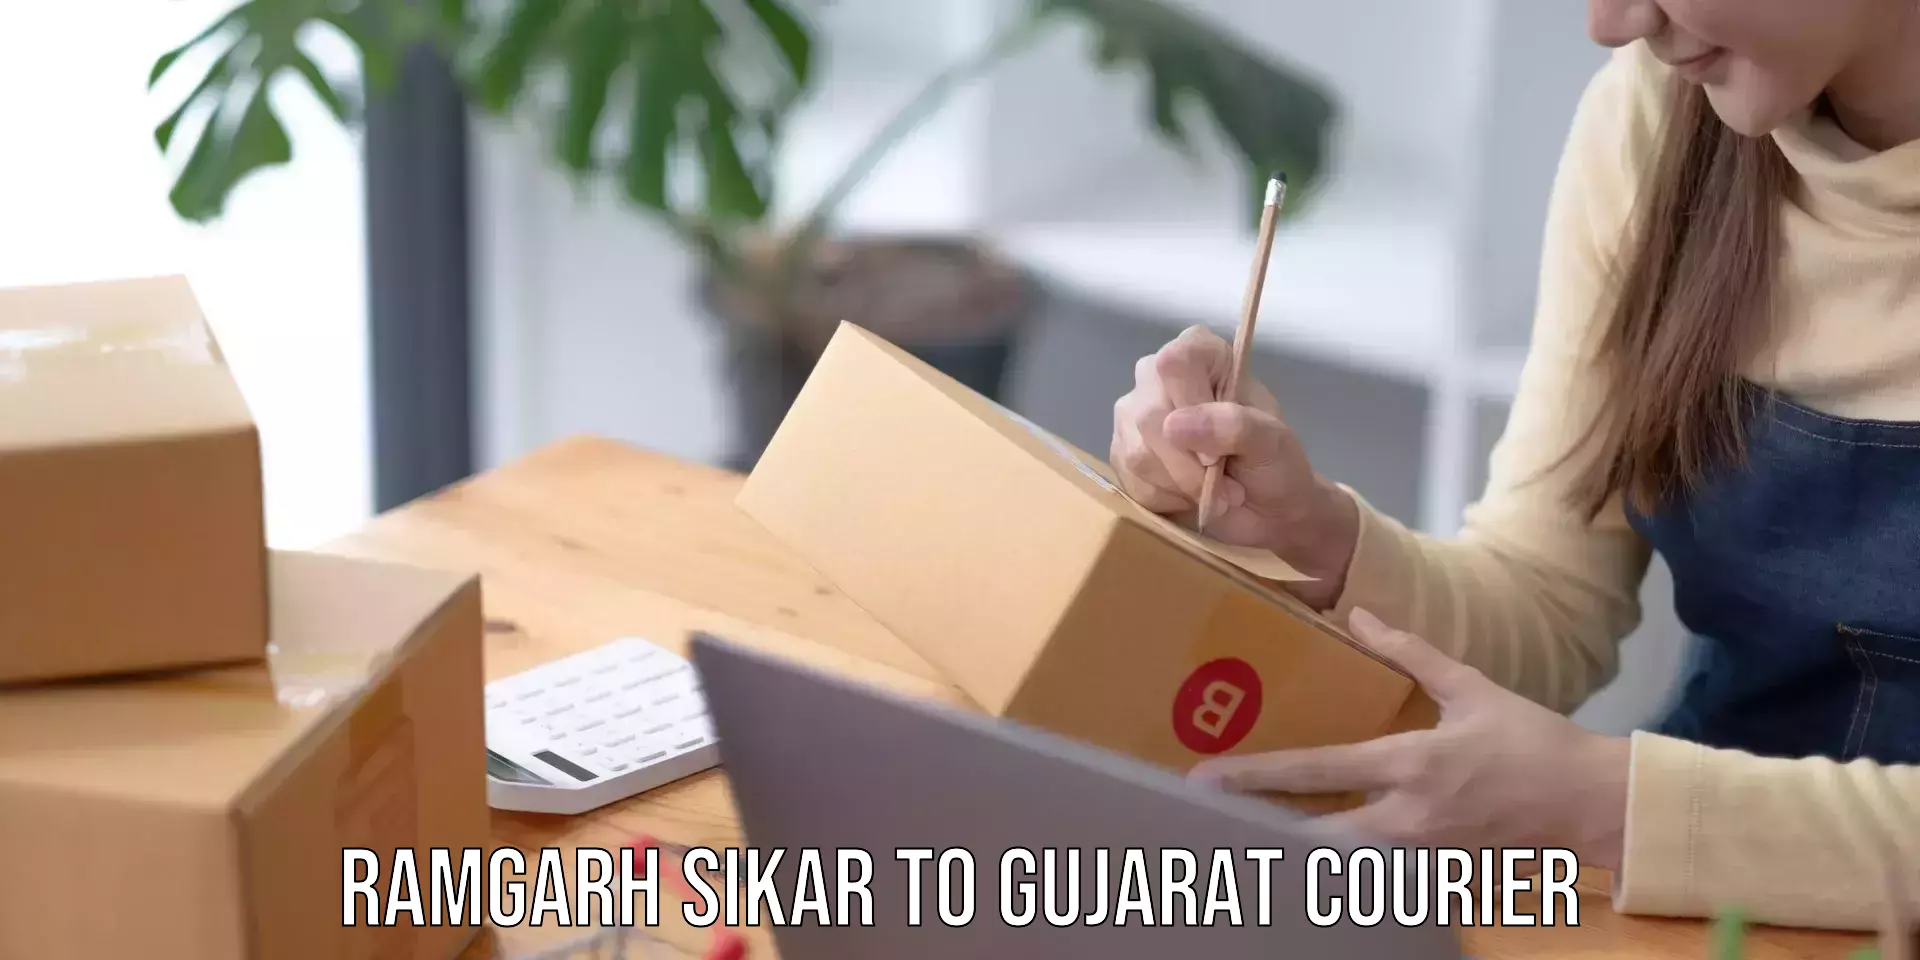 Comprehensive shipping services Ramgarh Sikar to Gujarat